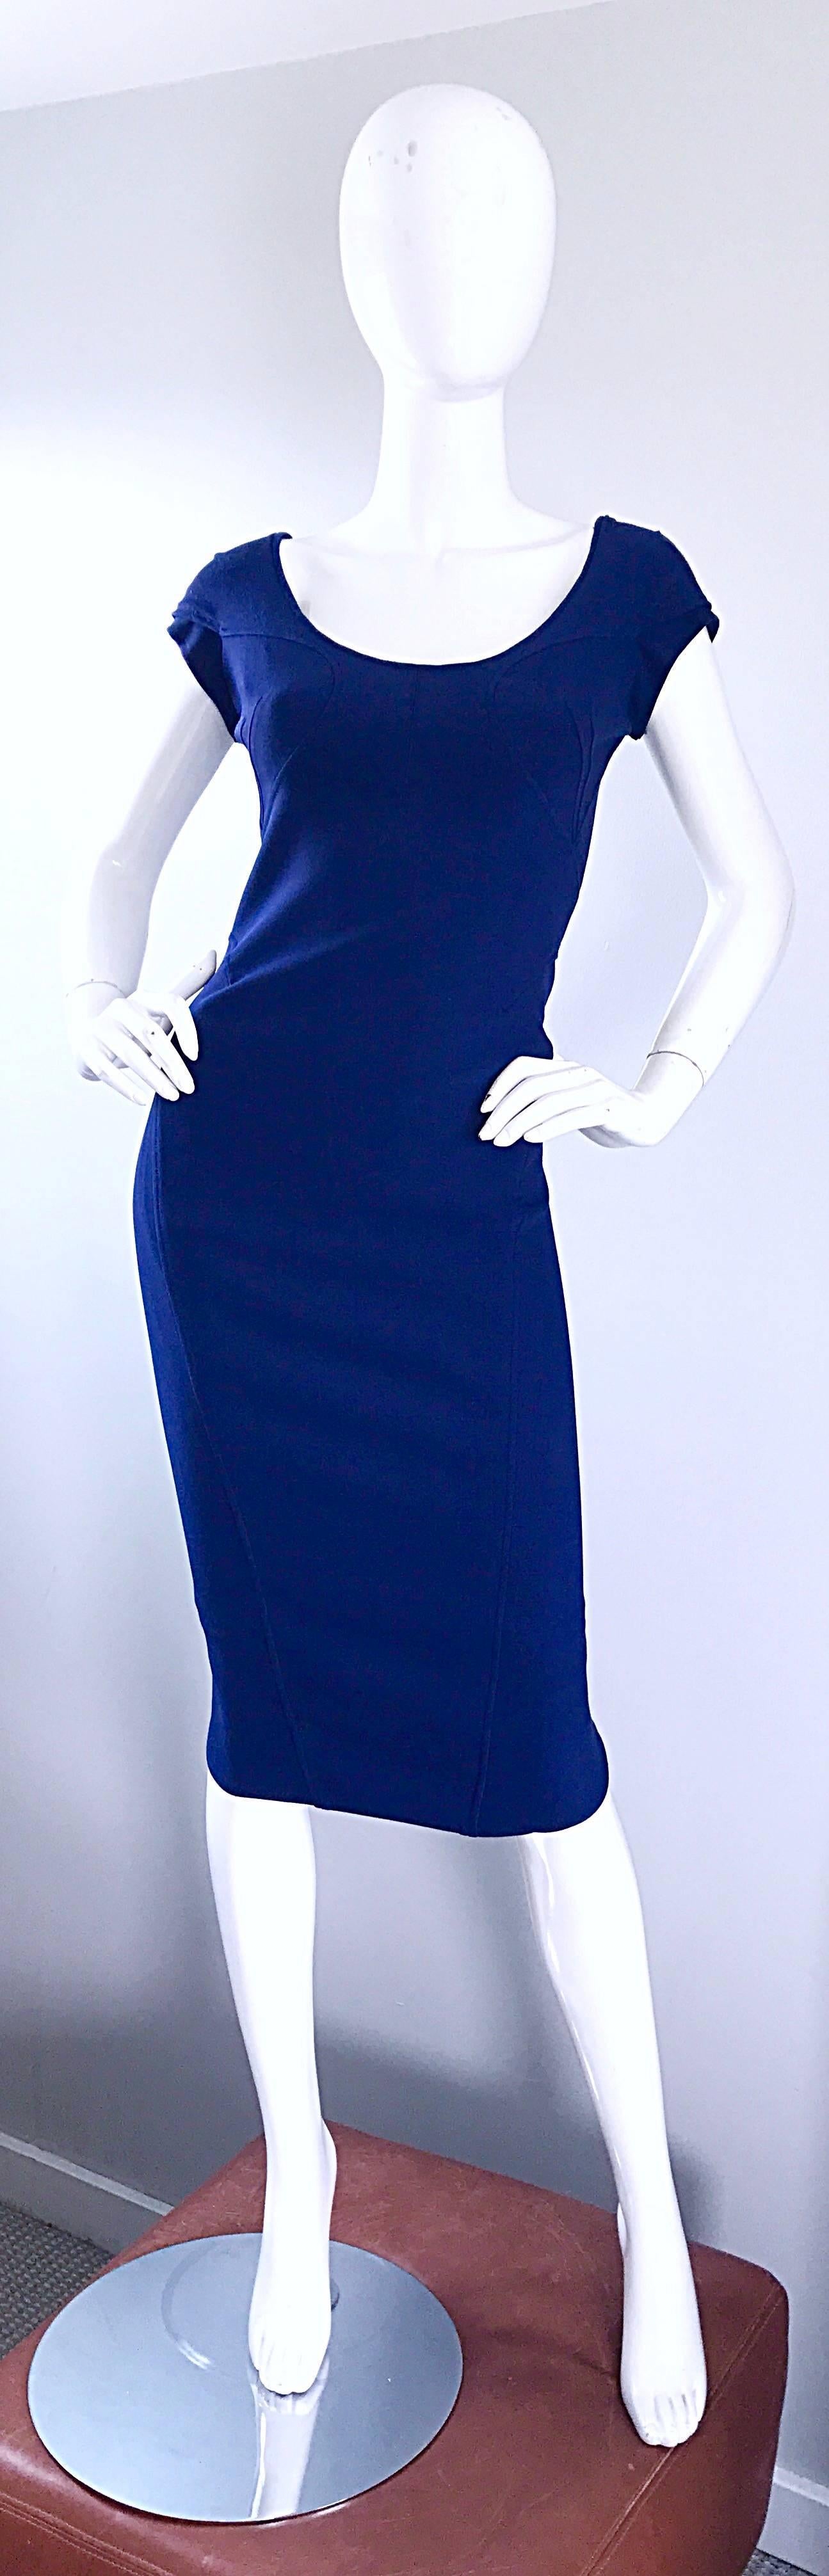 Flattering early 2000s ZAC POSEN navy blue bodcon dress! Signature stitching hides any 'problem' areas. Stretch virgin wool blend, and fully lined in silk. Tulip hem in th eback. Hidden zipper up th eback, with hook-and-eye closure. Great belted or